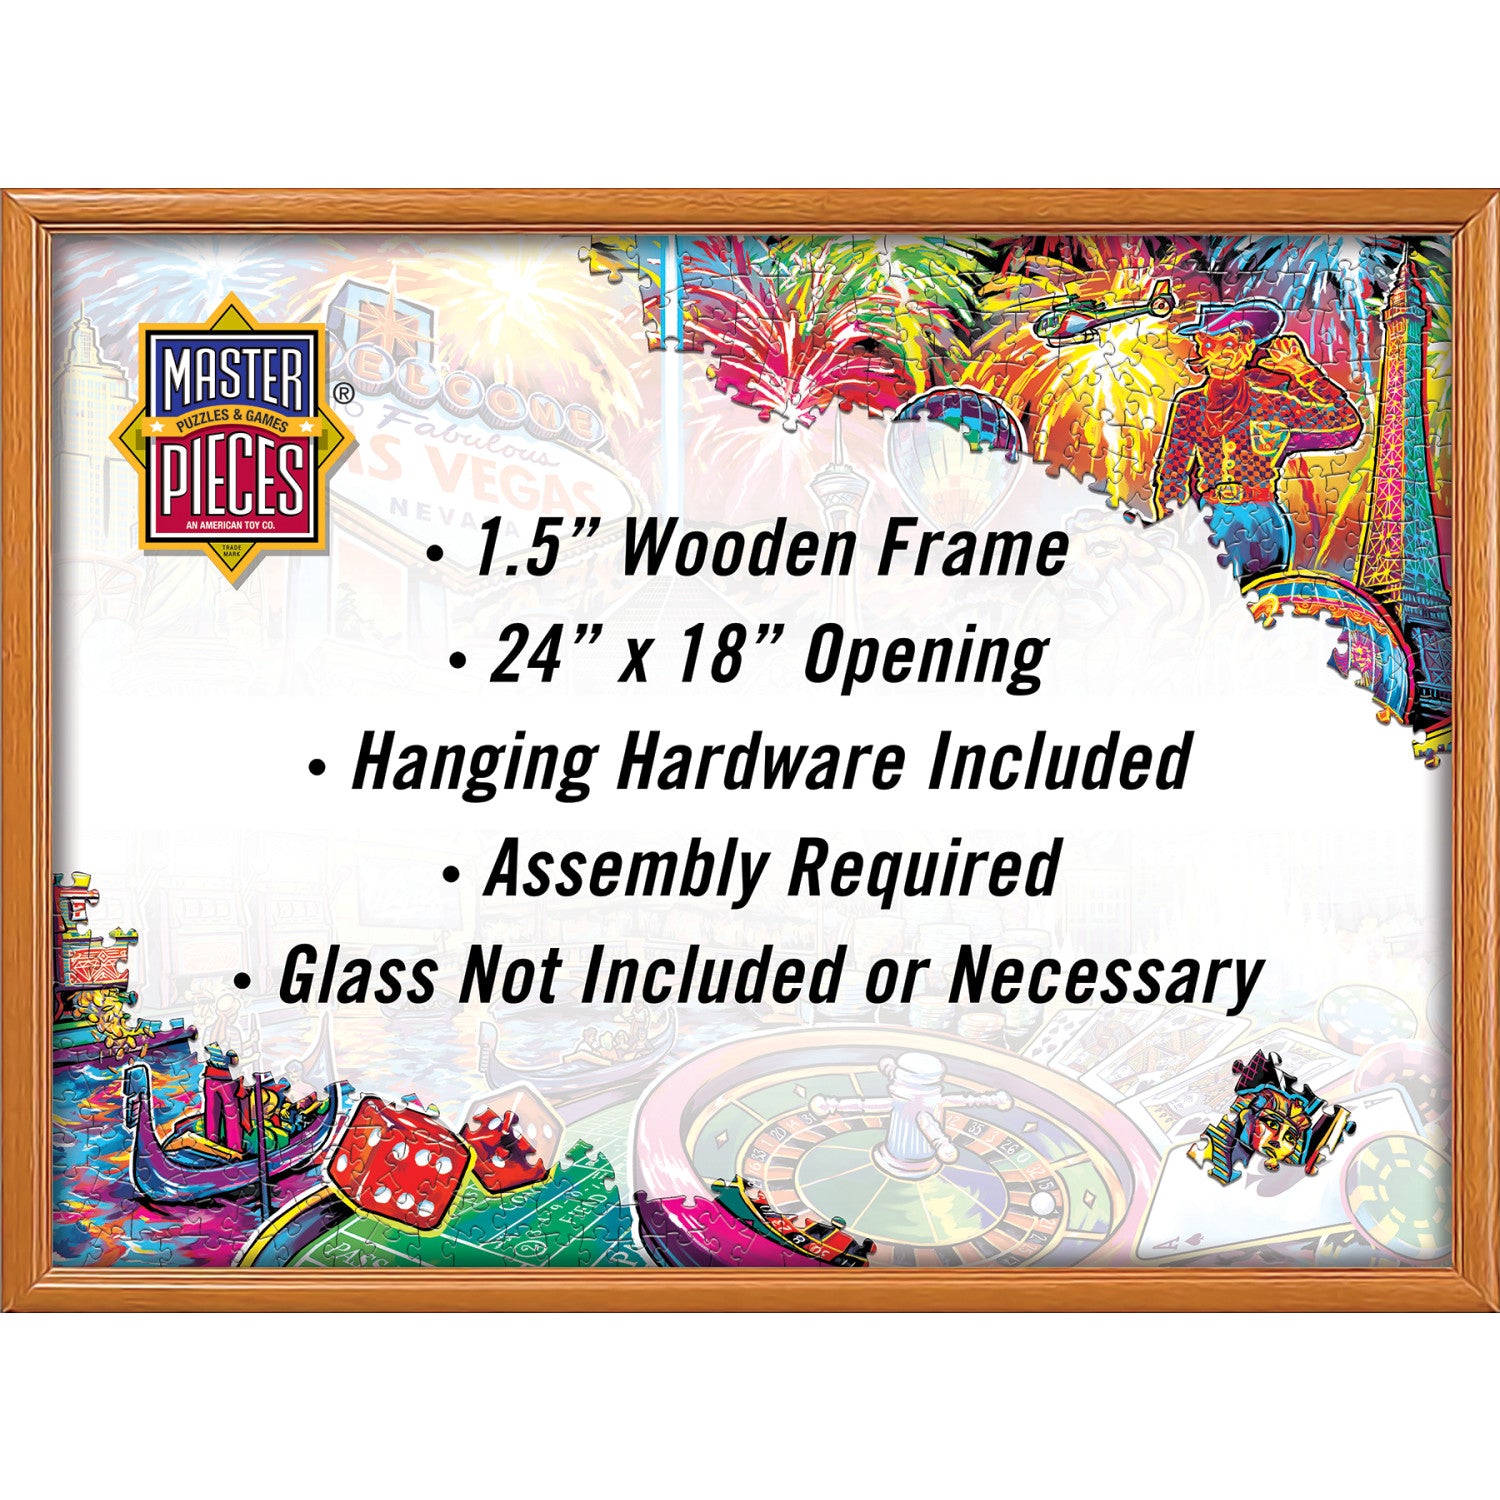 Wood Puzzle Frame - 18"x24"